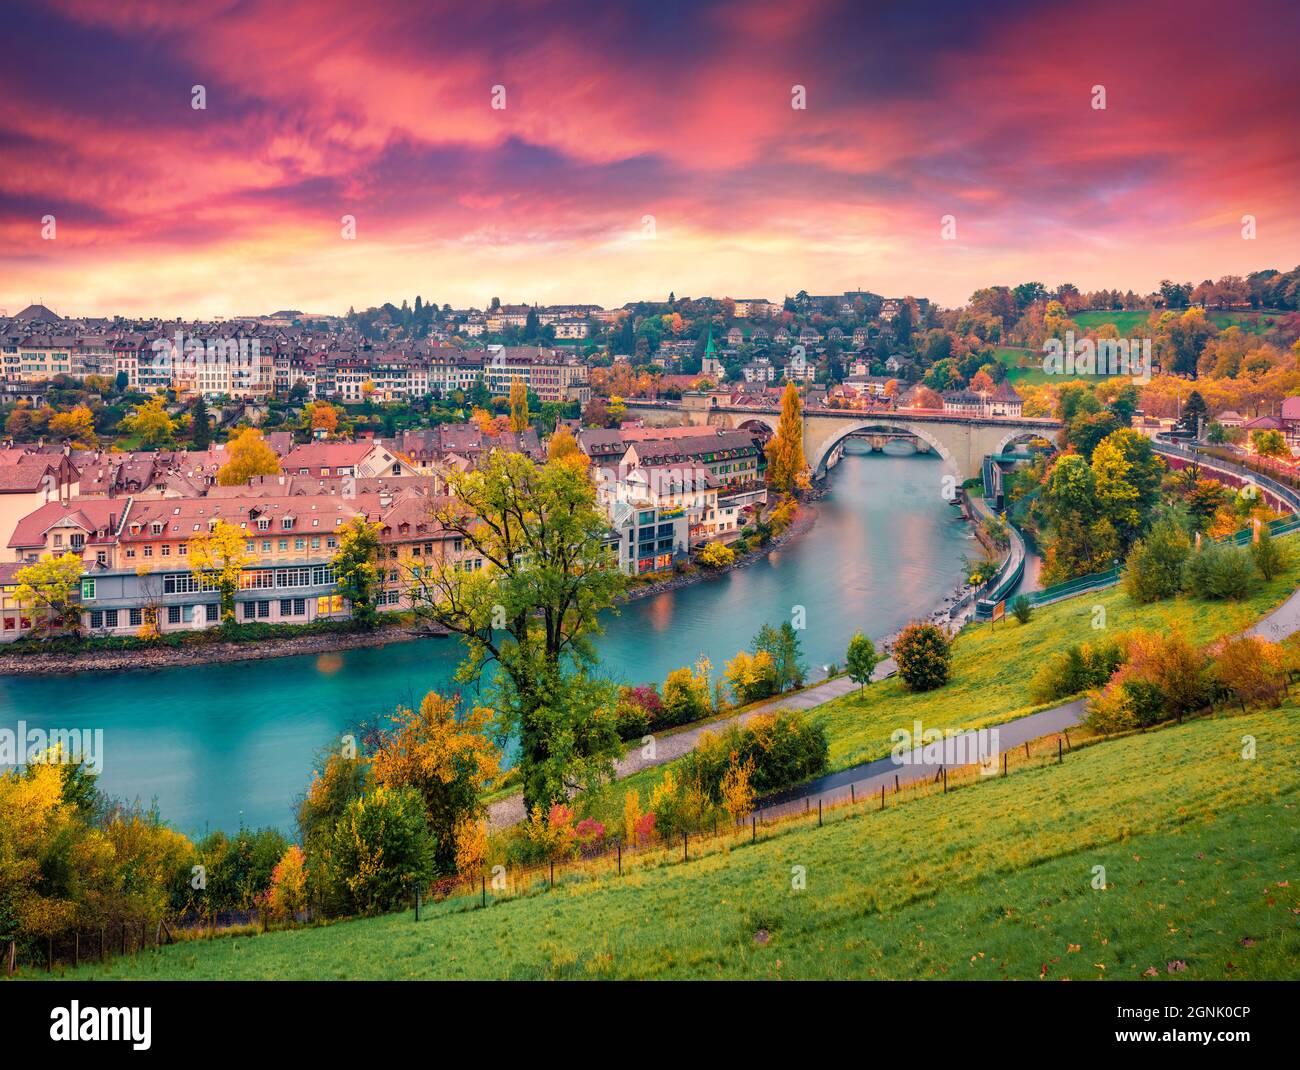 Landscape photography. Fantastic evening view of Bern town with Pont de Nydegg bridge and Nydeggkirche - Protestant church on background. Autumn sunse Stock Photo